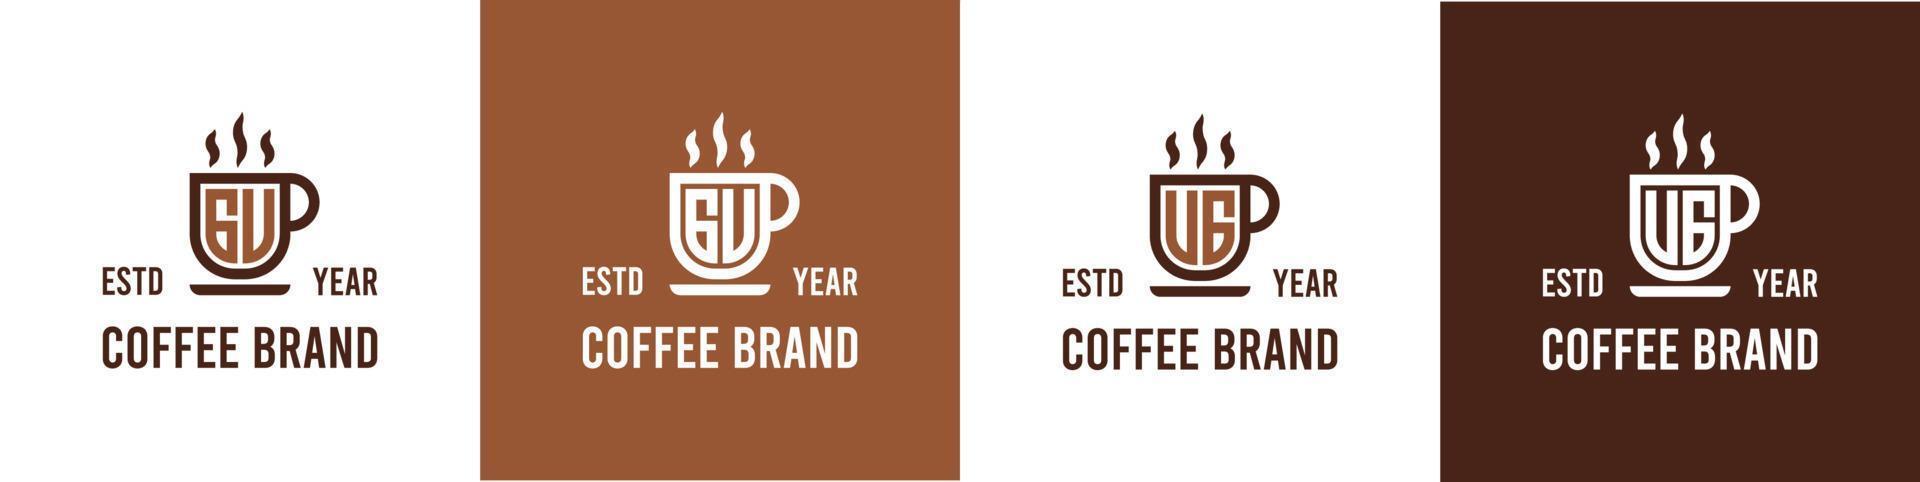 Letter GU and UG Coffee Logo, suitable for any business related to Coffee, Tea, or Other with GU or UG initials. vector